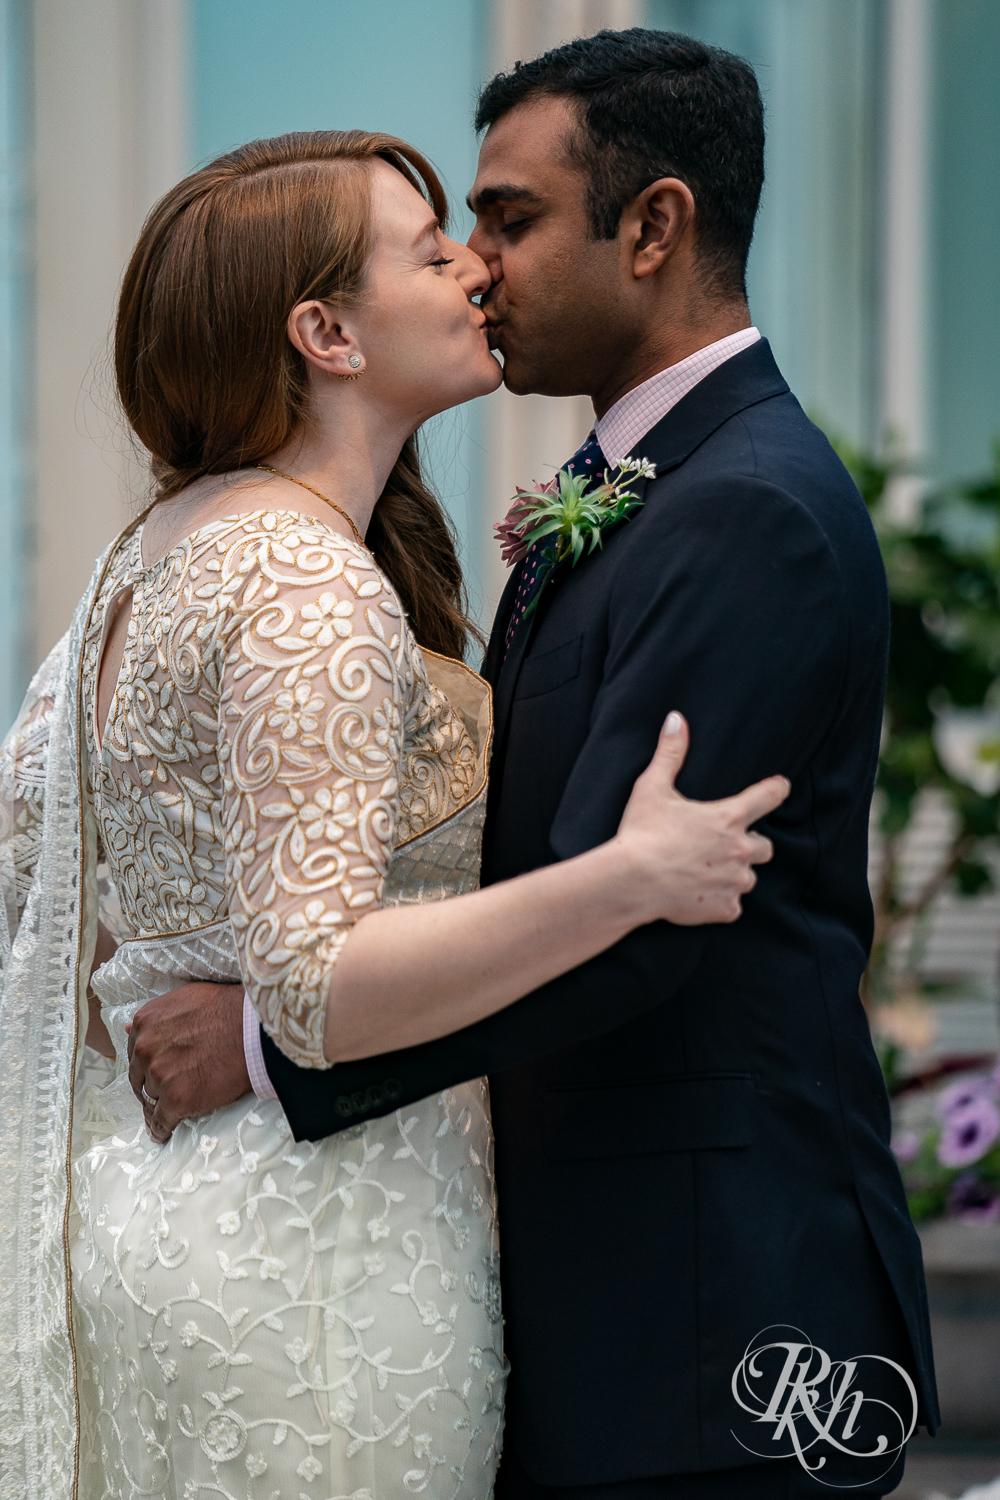 Bride and groom kiss during ceremony at Indian wedding at Como Zoo Conservatory in Saint Paul, Minnesota.